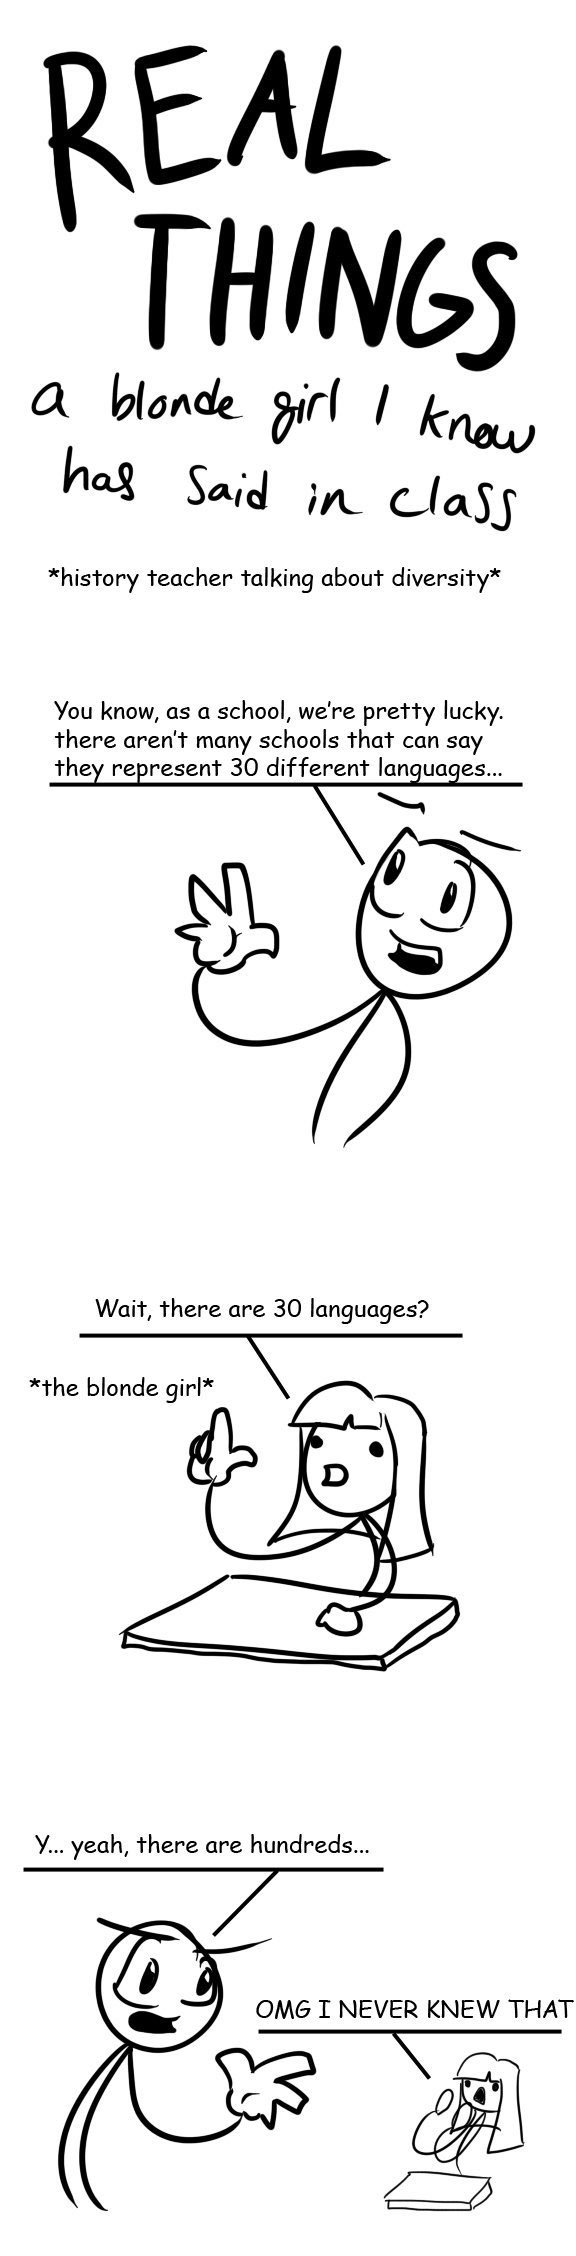 Real Things A Blonde Girl Says